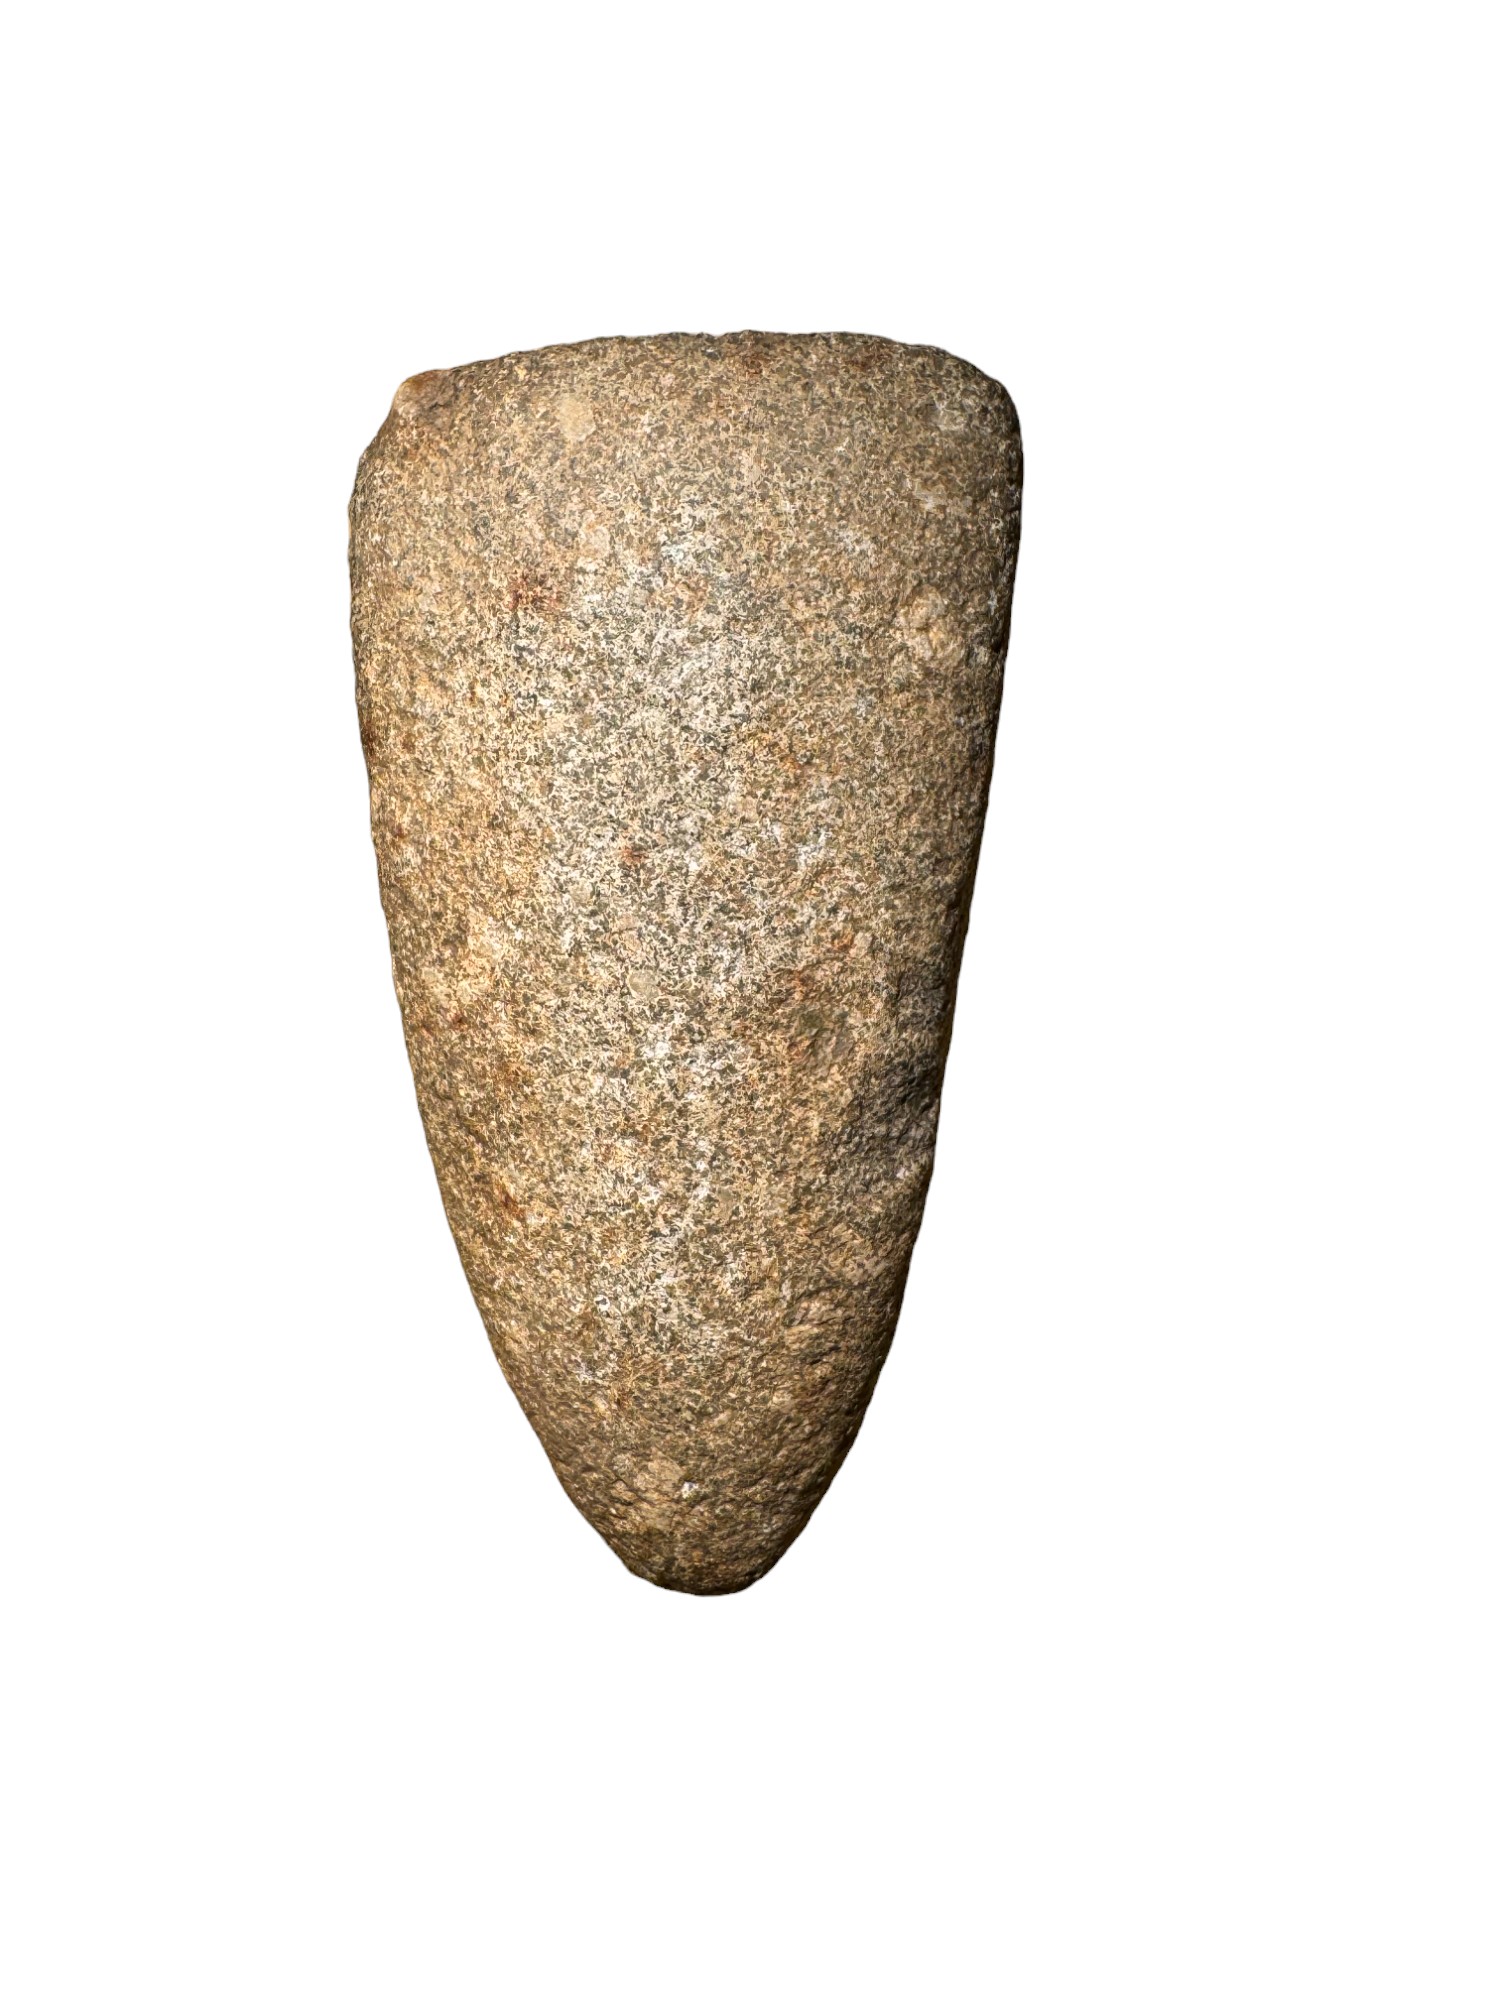 Antiquities: European Neolithic Stone Age Axe Head - Image 2 of 2